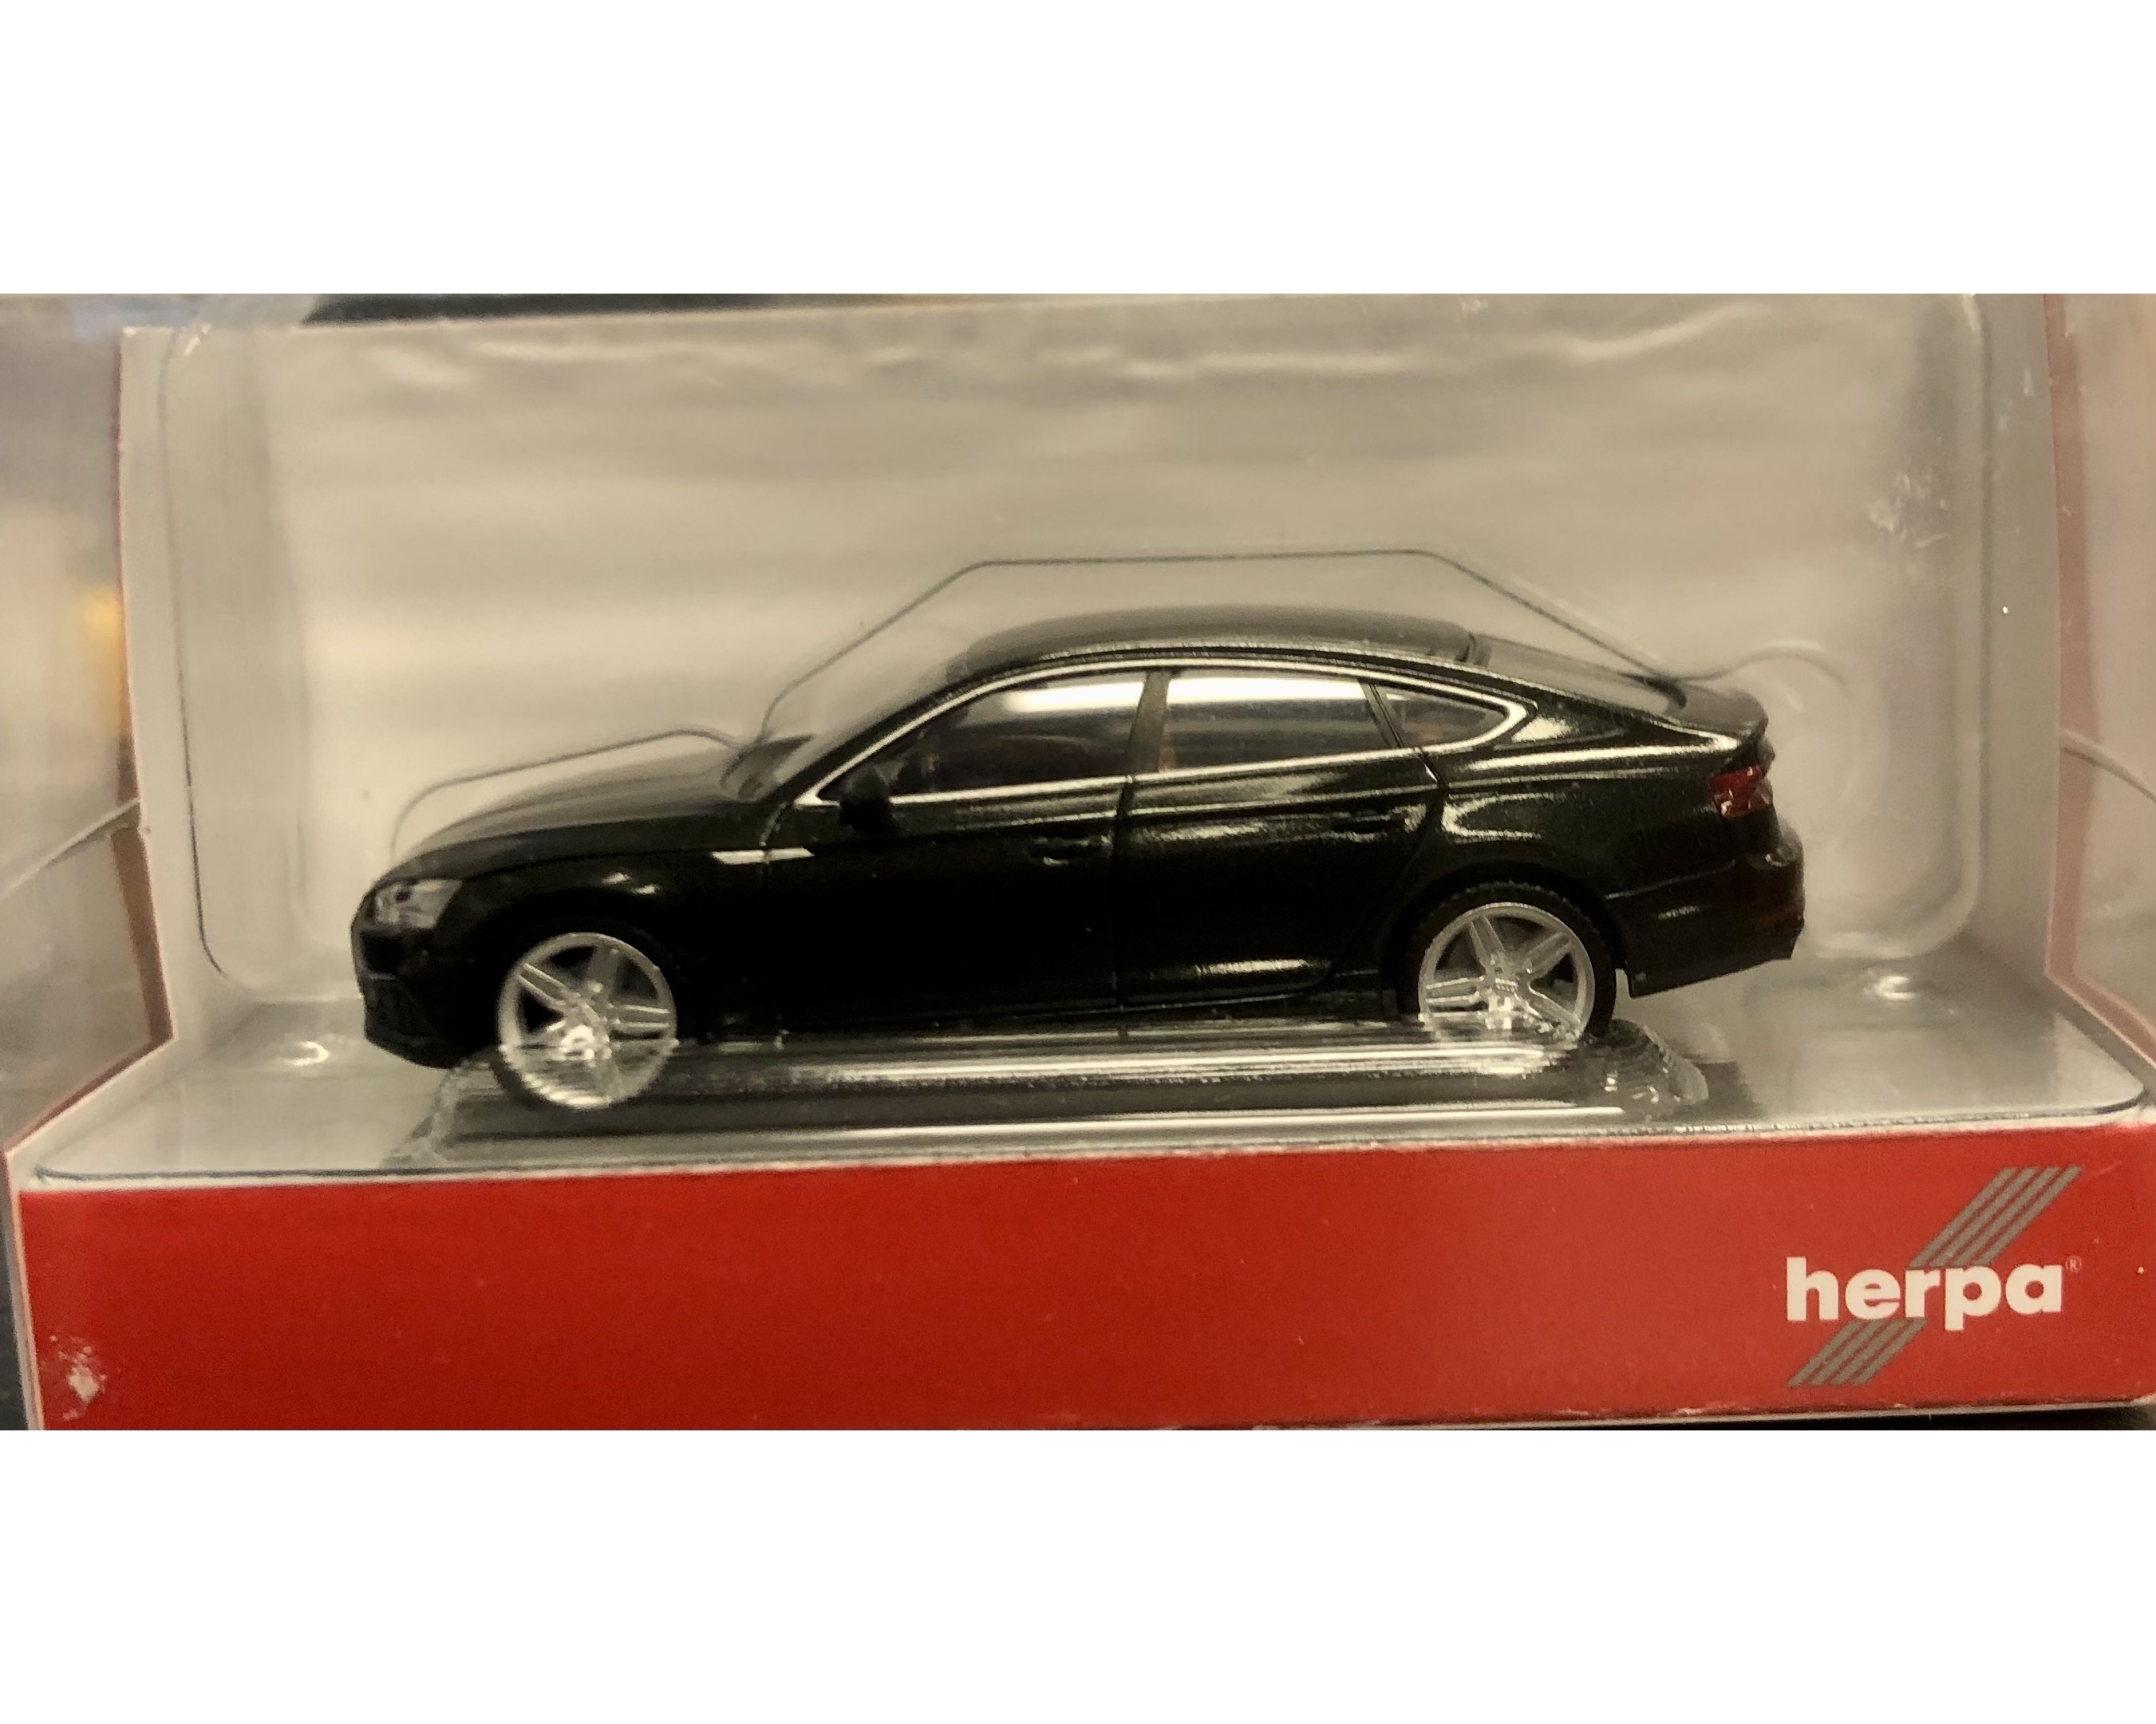 Herpa 28660.002 - AUDI A5 COUPE WIT